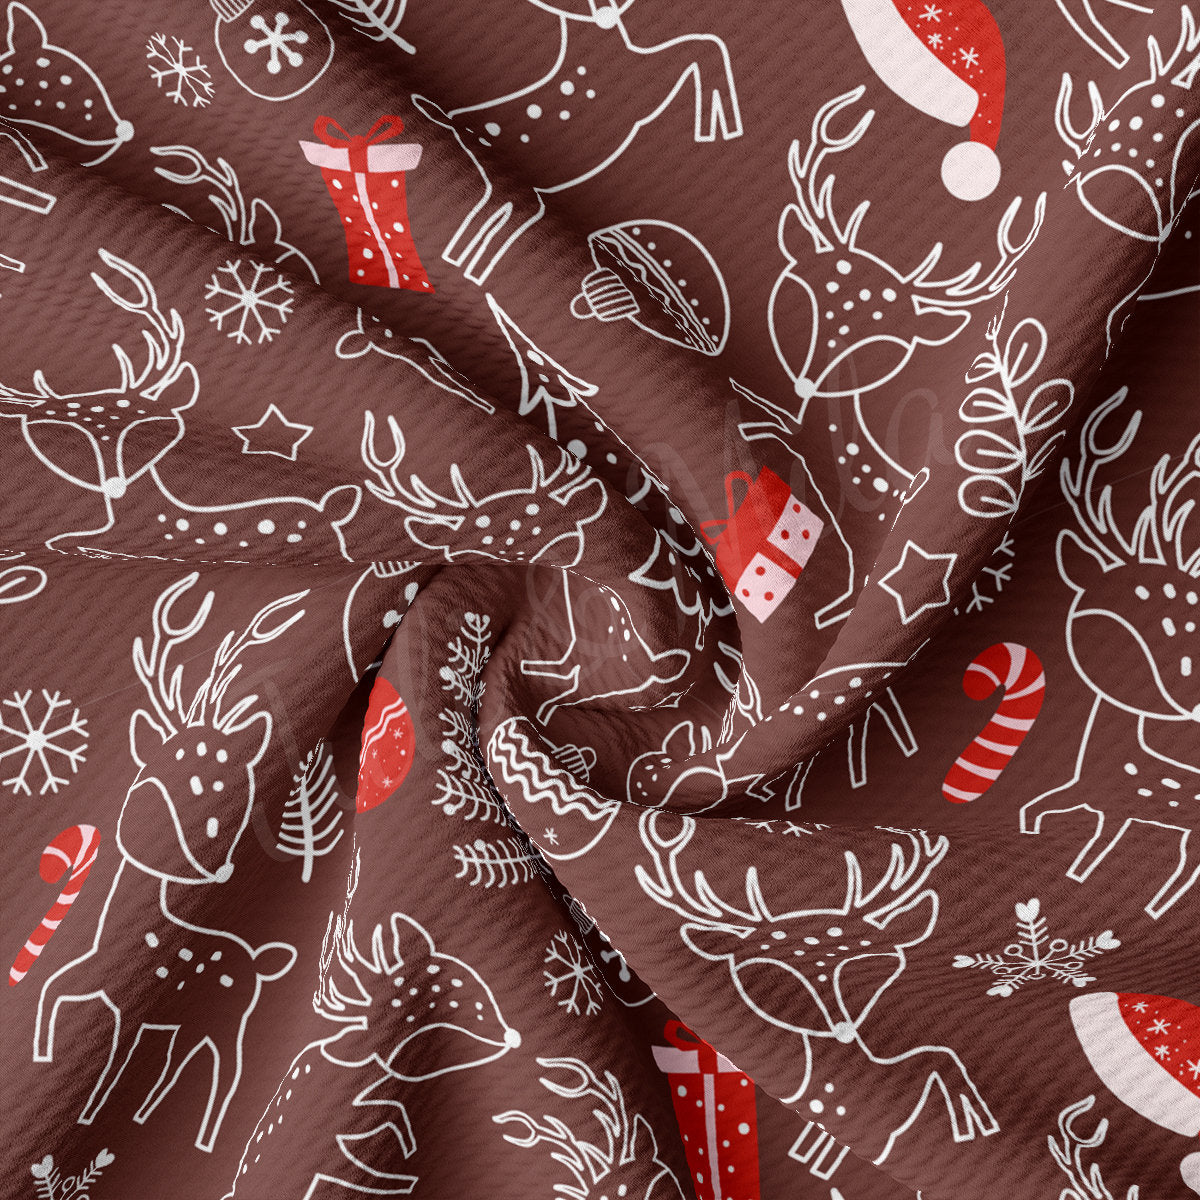 Christmas Printed Liverpool Bullet Textured Fabric by the yard 4Way Stretch Solid Strip Thick Knit Liverpool Fabric AA2164